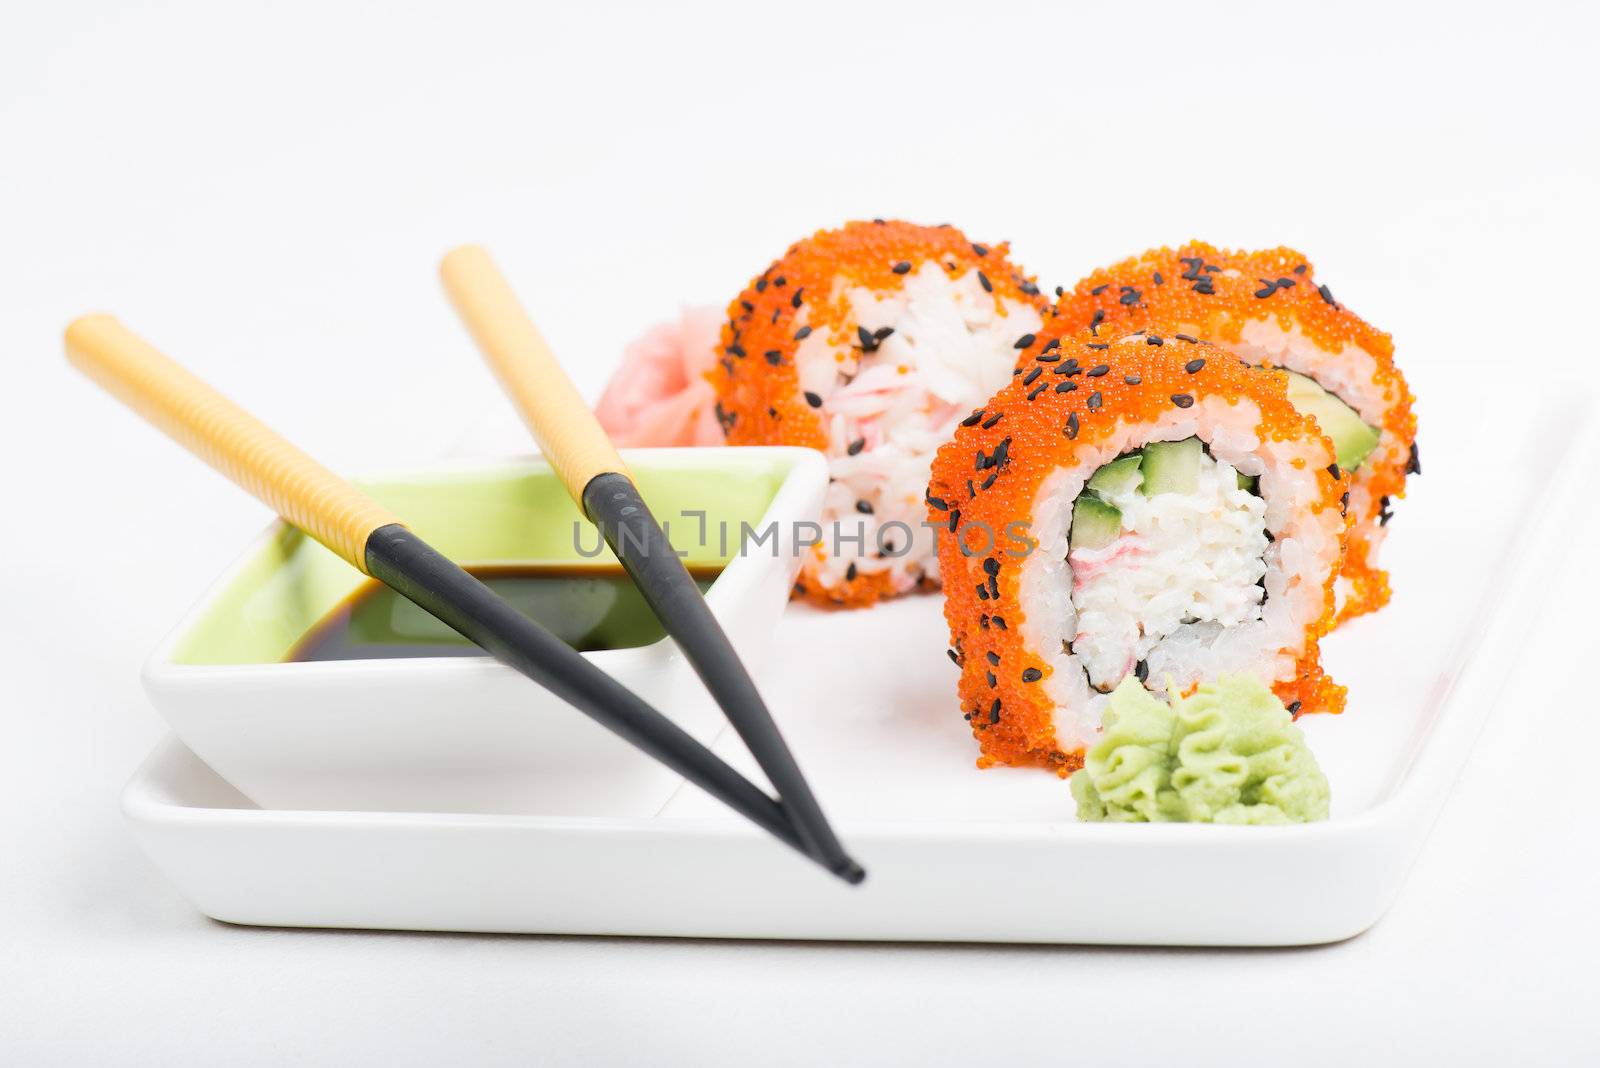 Chopsticks and sushi on the plate by anytka